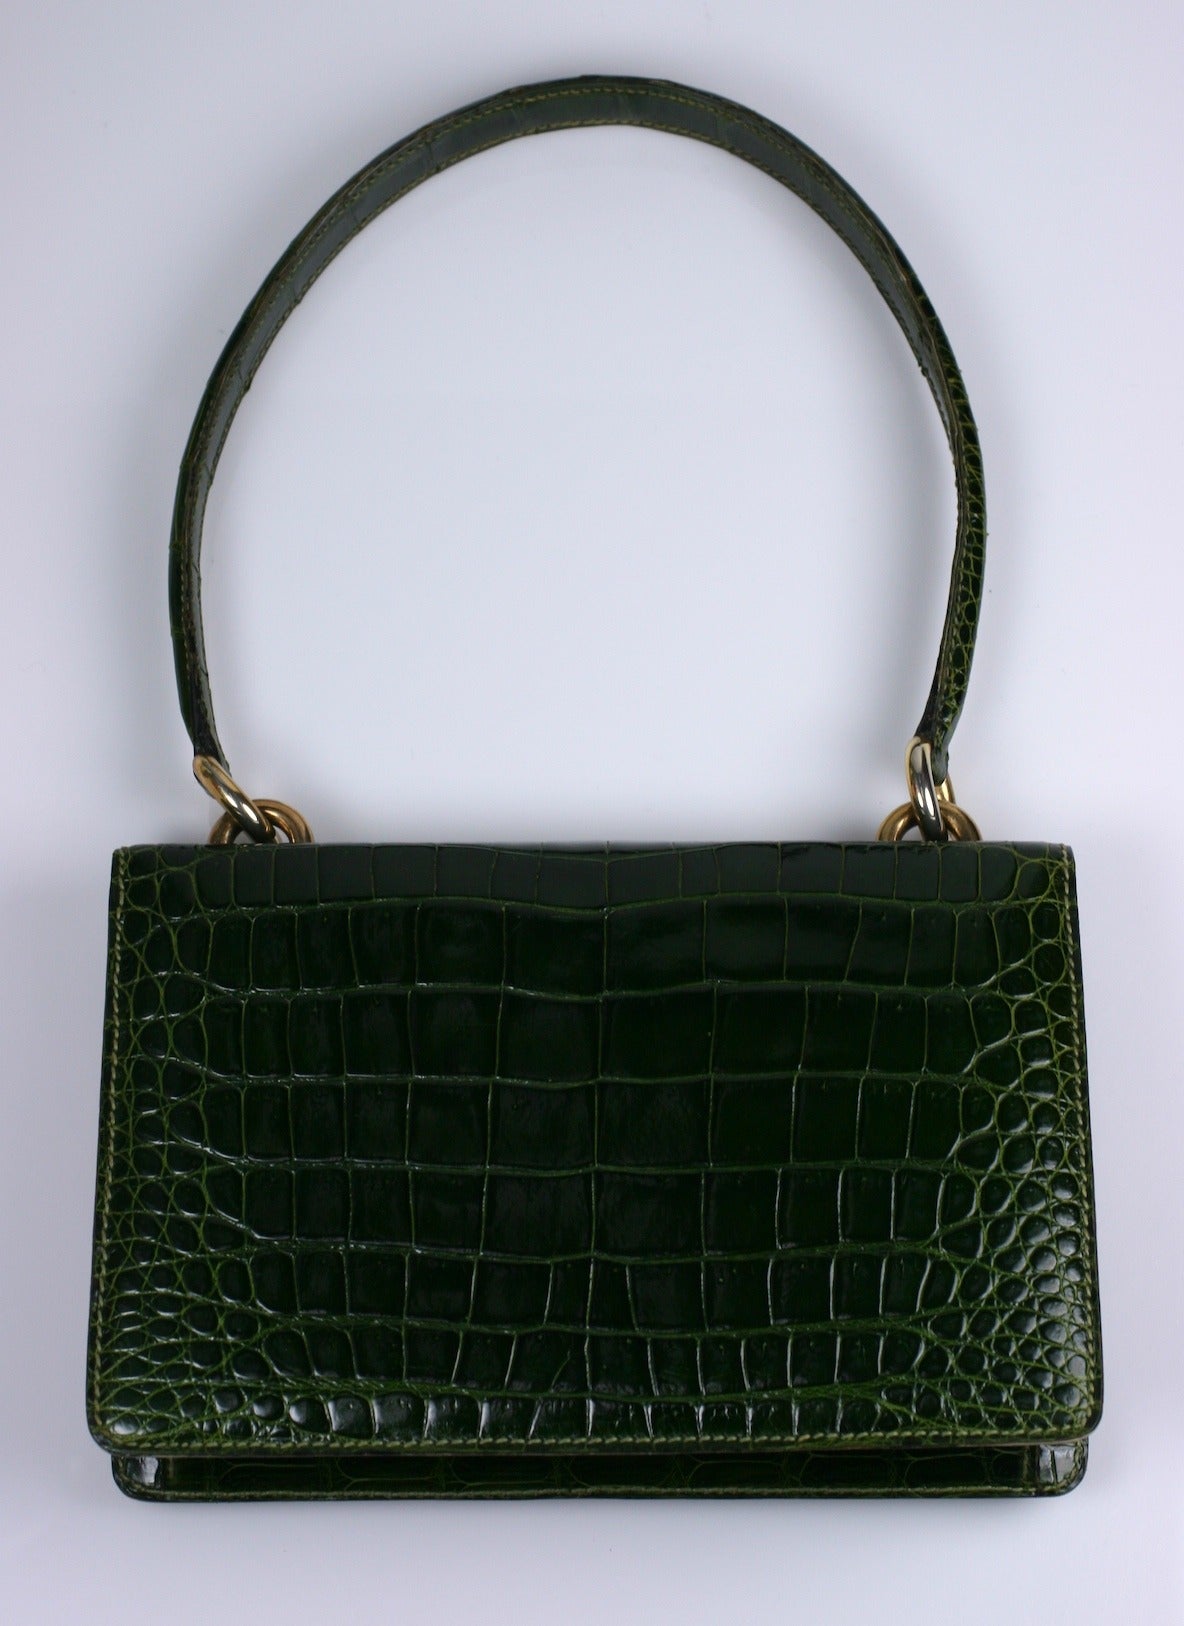 Elegant Lederer alligator bag in deep forest green with tapered and elongated handle which can be used over the shoulder as well. Very chic option with gilt barrel closure and bold gilt hoop metal fittings for handle. 
9